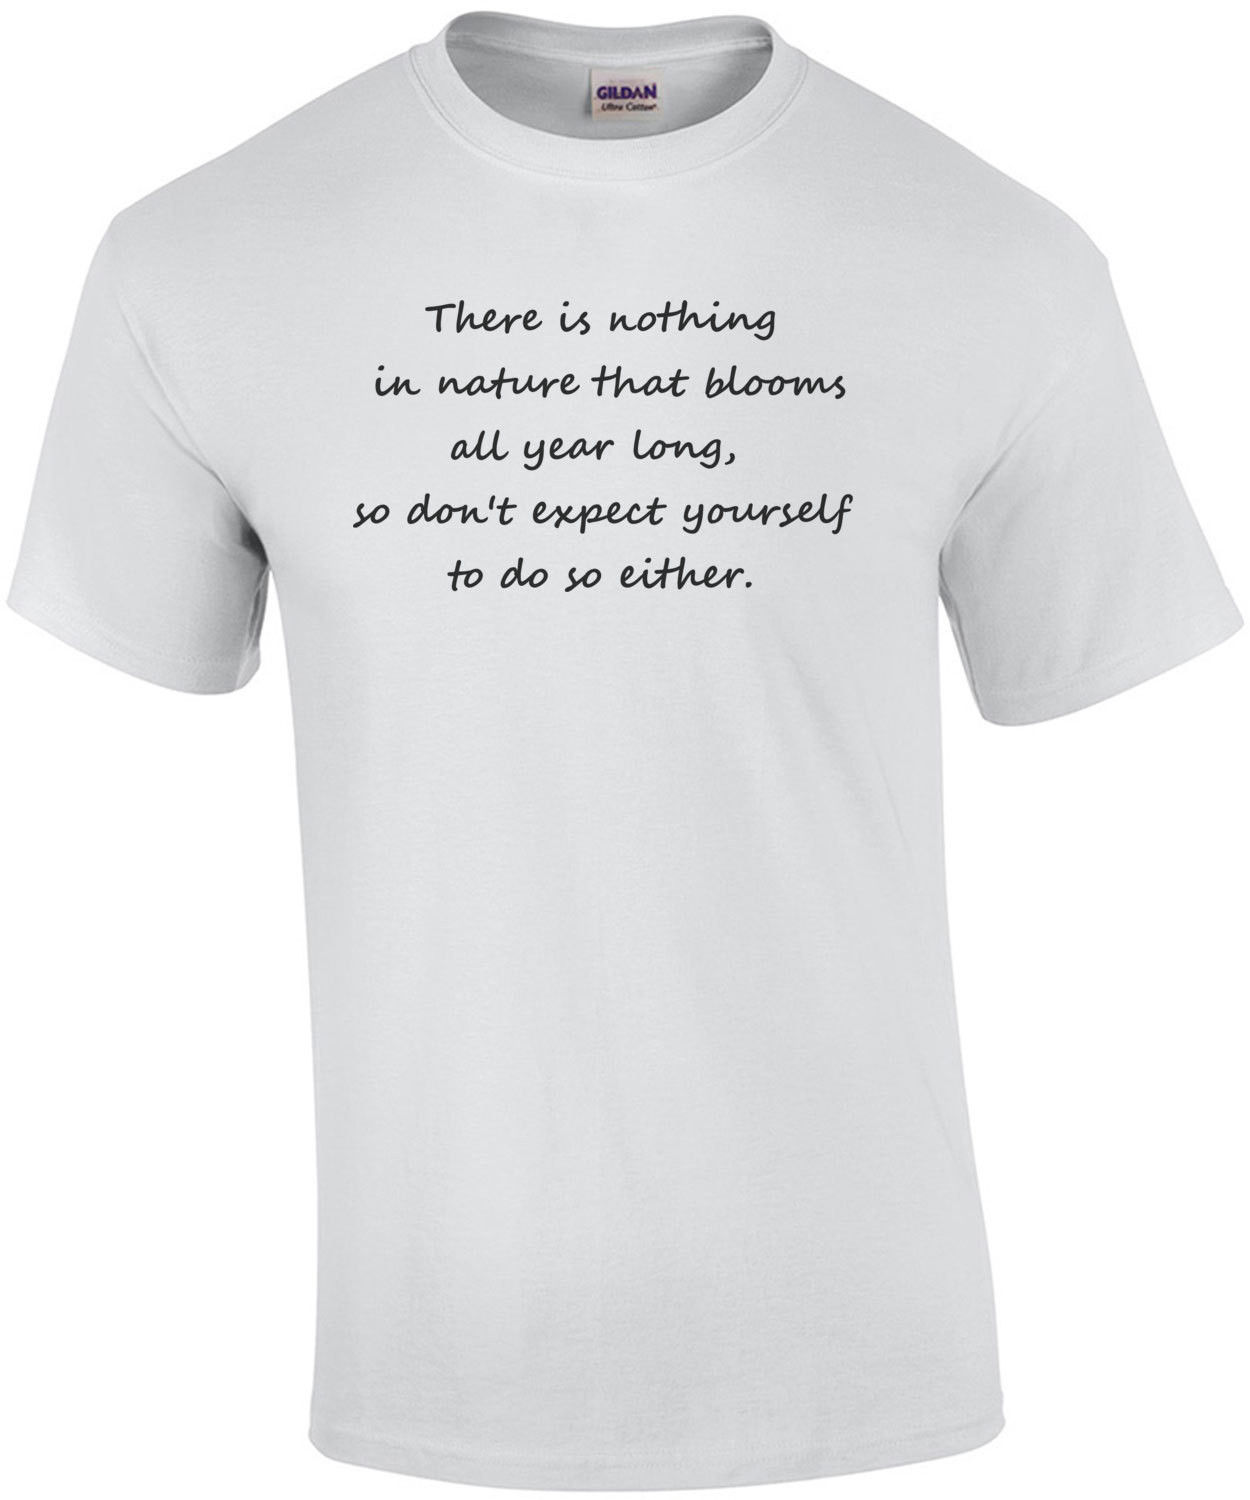 There is nothing in nature that blooms all year long, so don't expect yourself to do so either. Inspirational T-Shirt